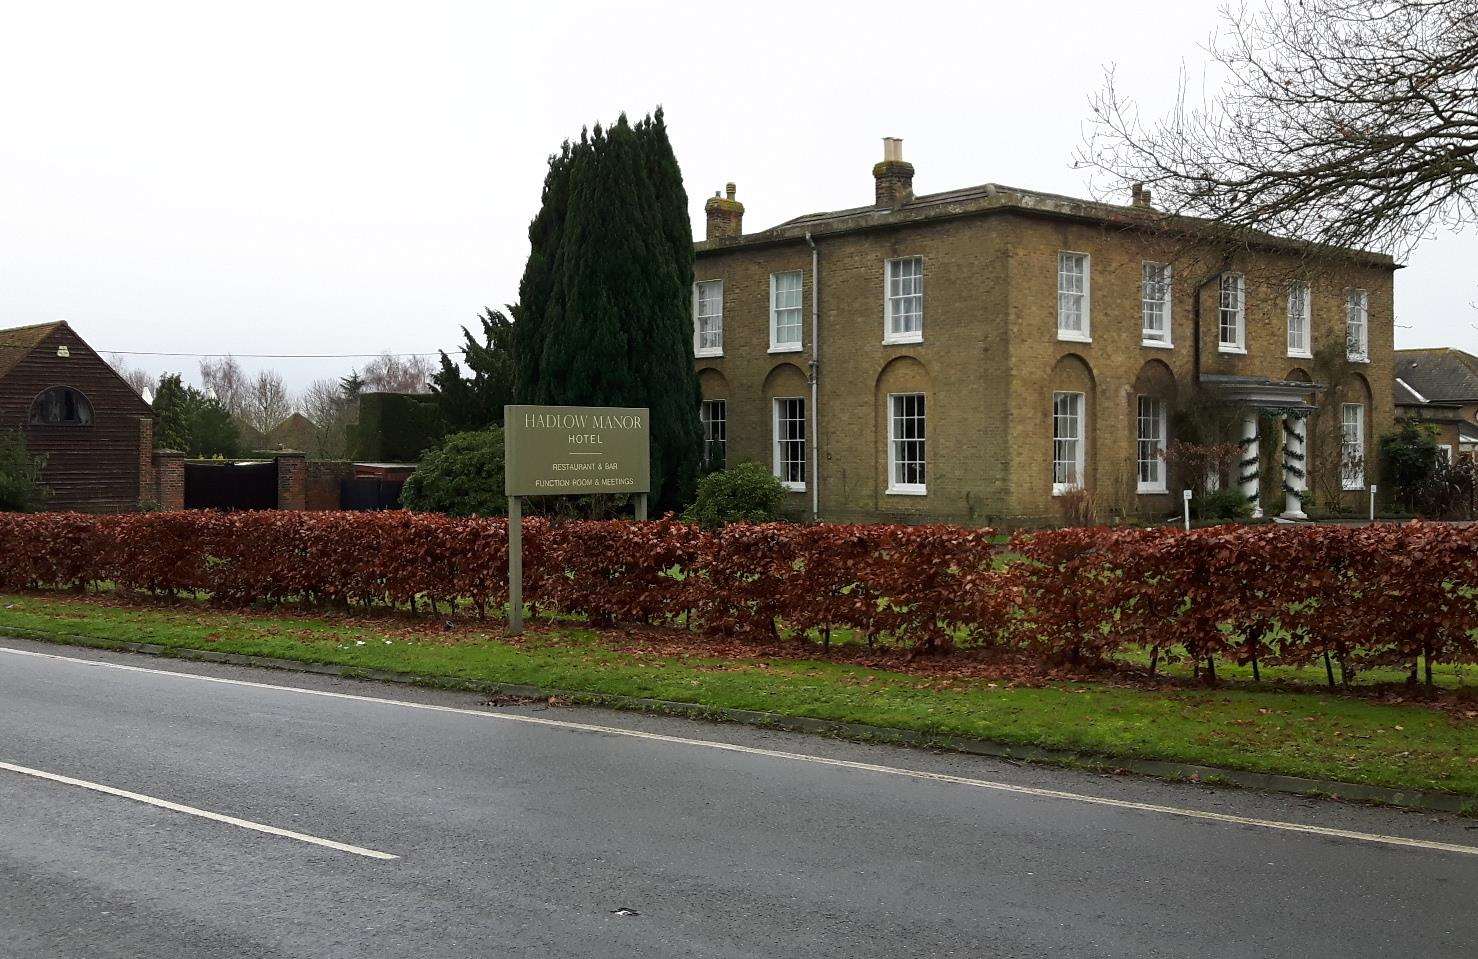 The incident is believed to have happened near The Hadlow Manor Hotel (6248764)